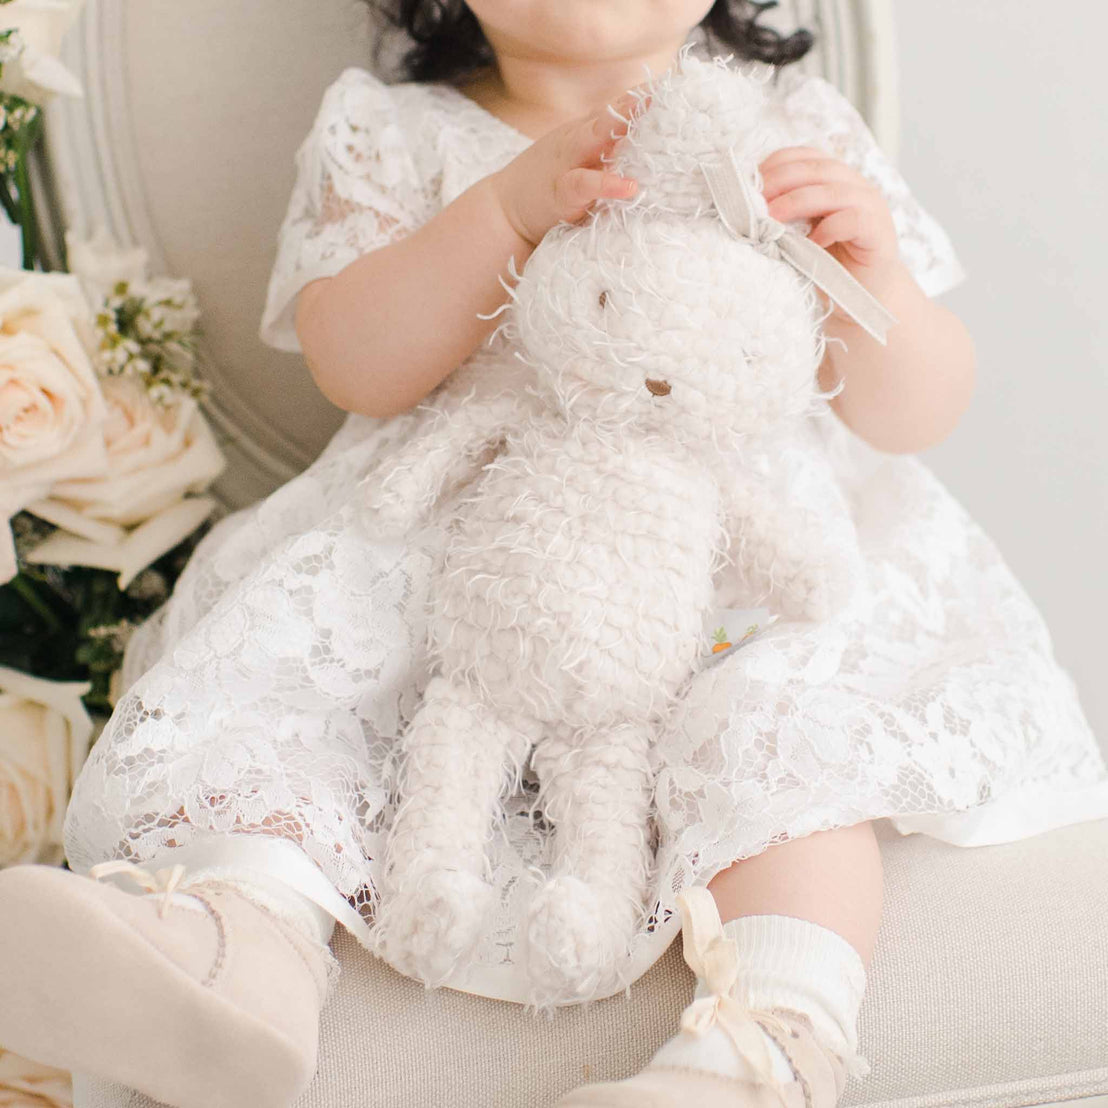 A toddler in a white lace dress holds a plush Rose Bunny while sitting on a light-colored chair, surrounded by soft pink roses. The child's face is obscured by the toy, emphasizing the Rose Bunny.